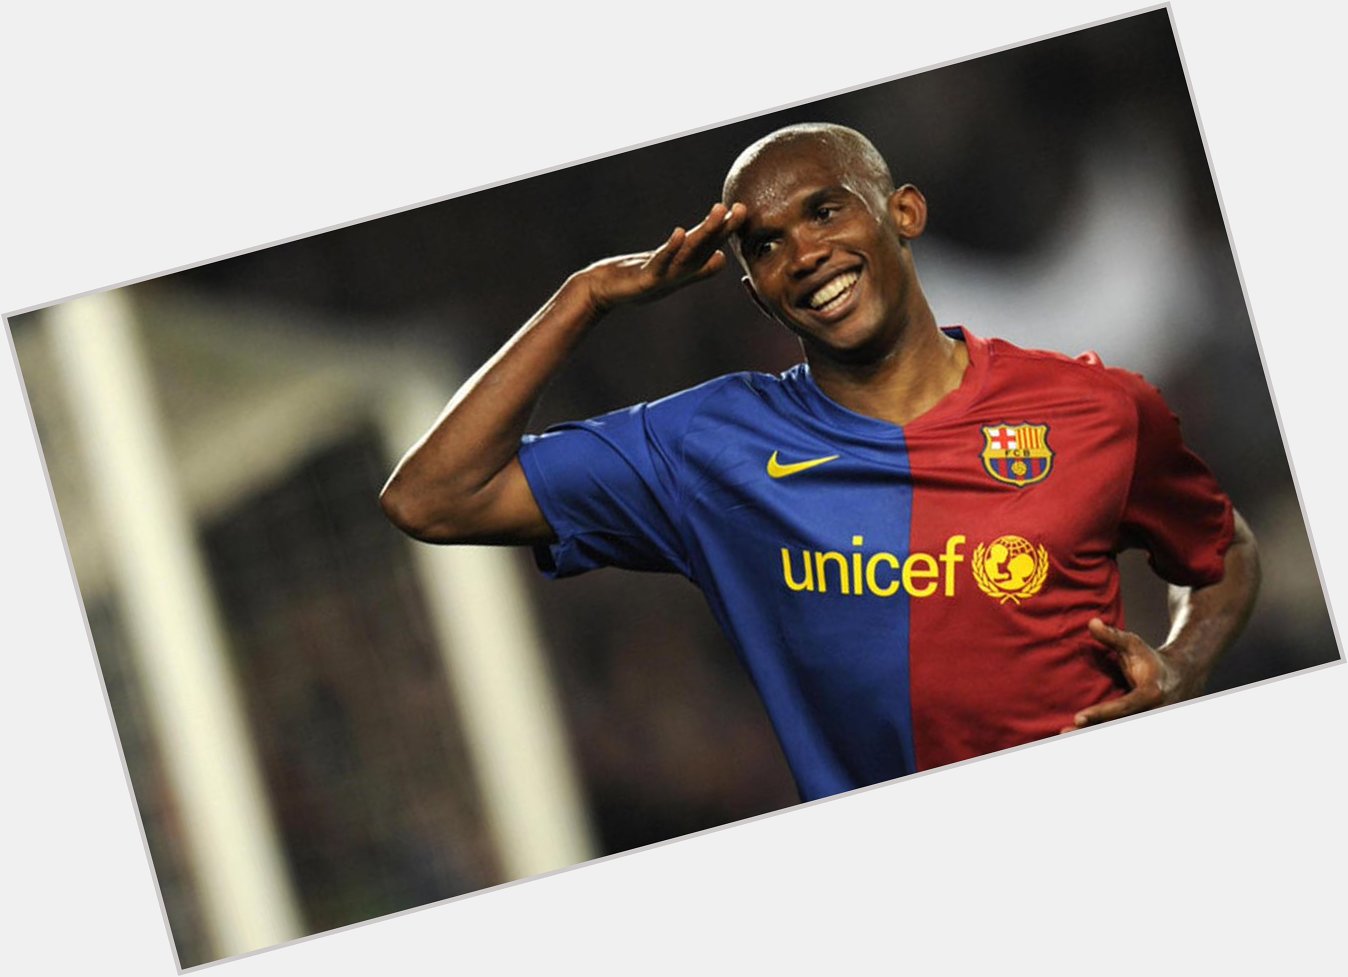 Happy 40th birthday to one of the most prolific strikers in Barça history, Samuel Eto\o! 